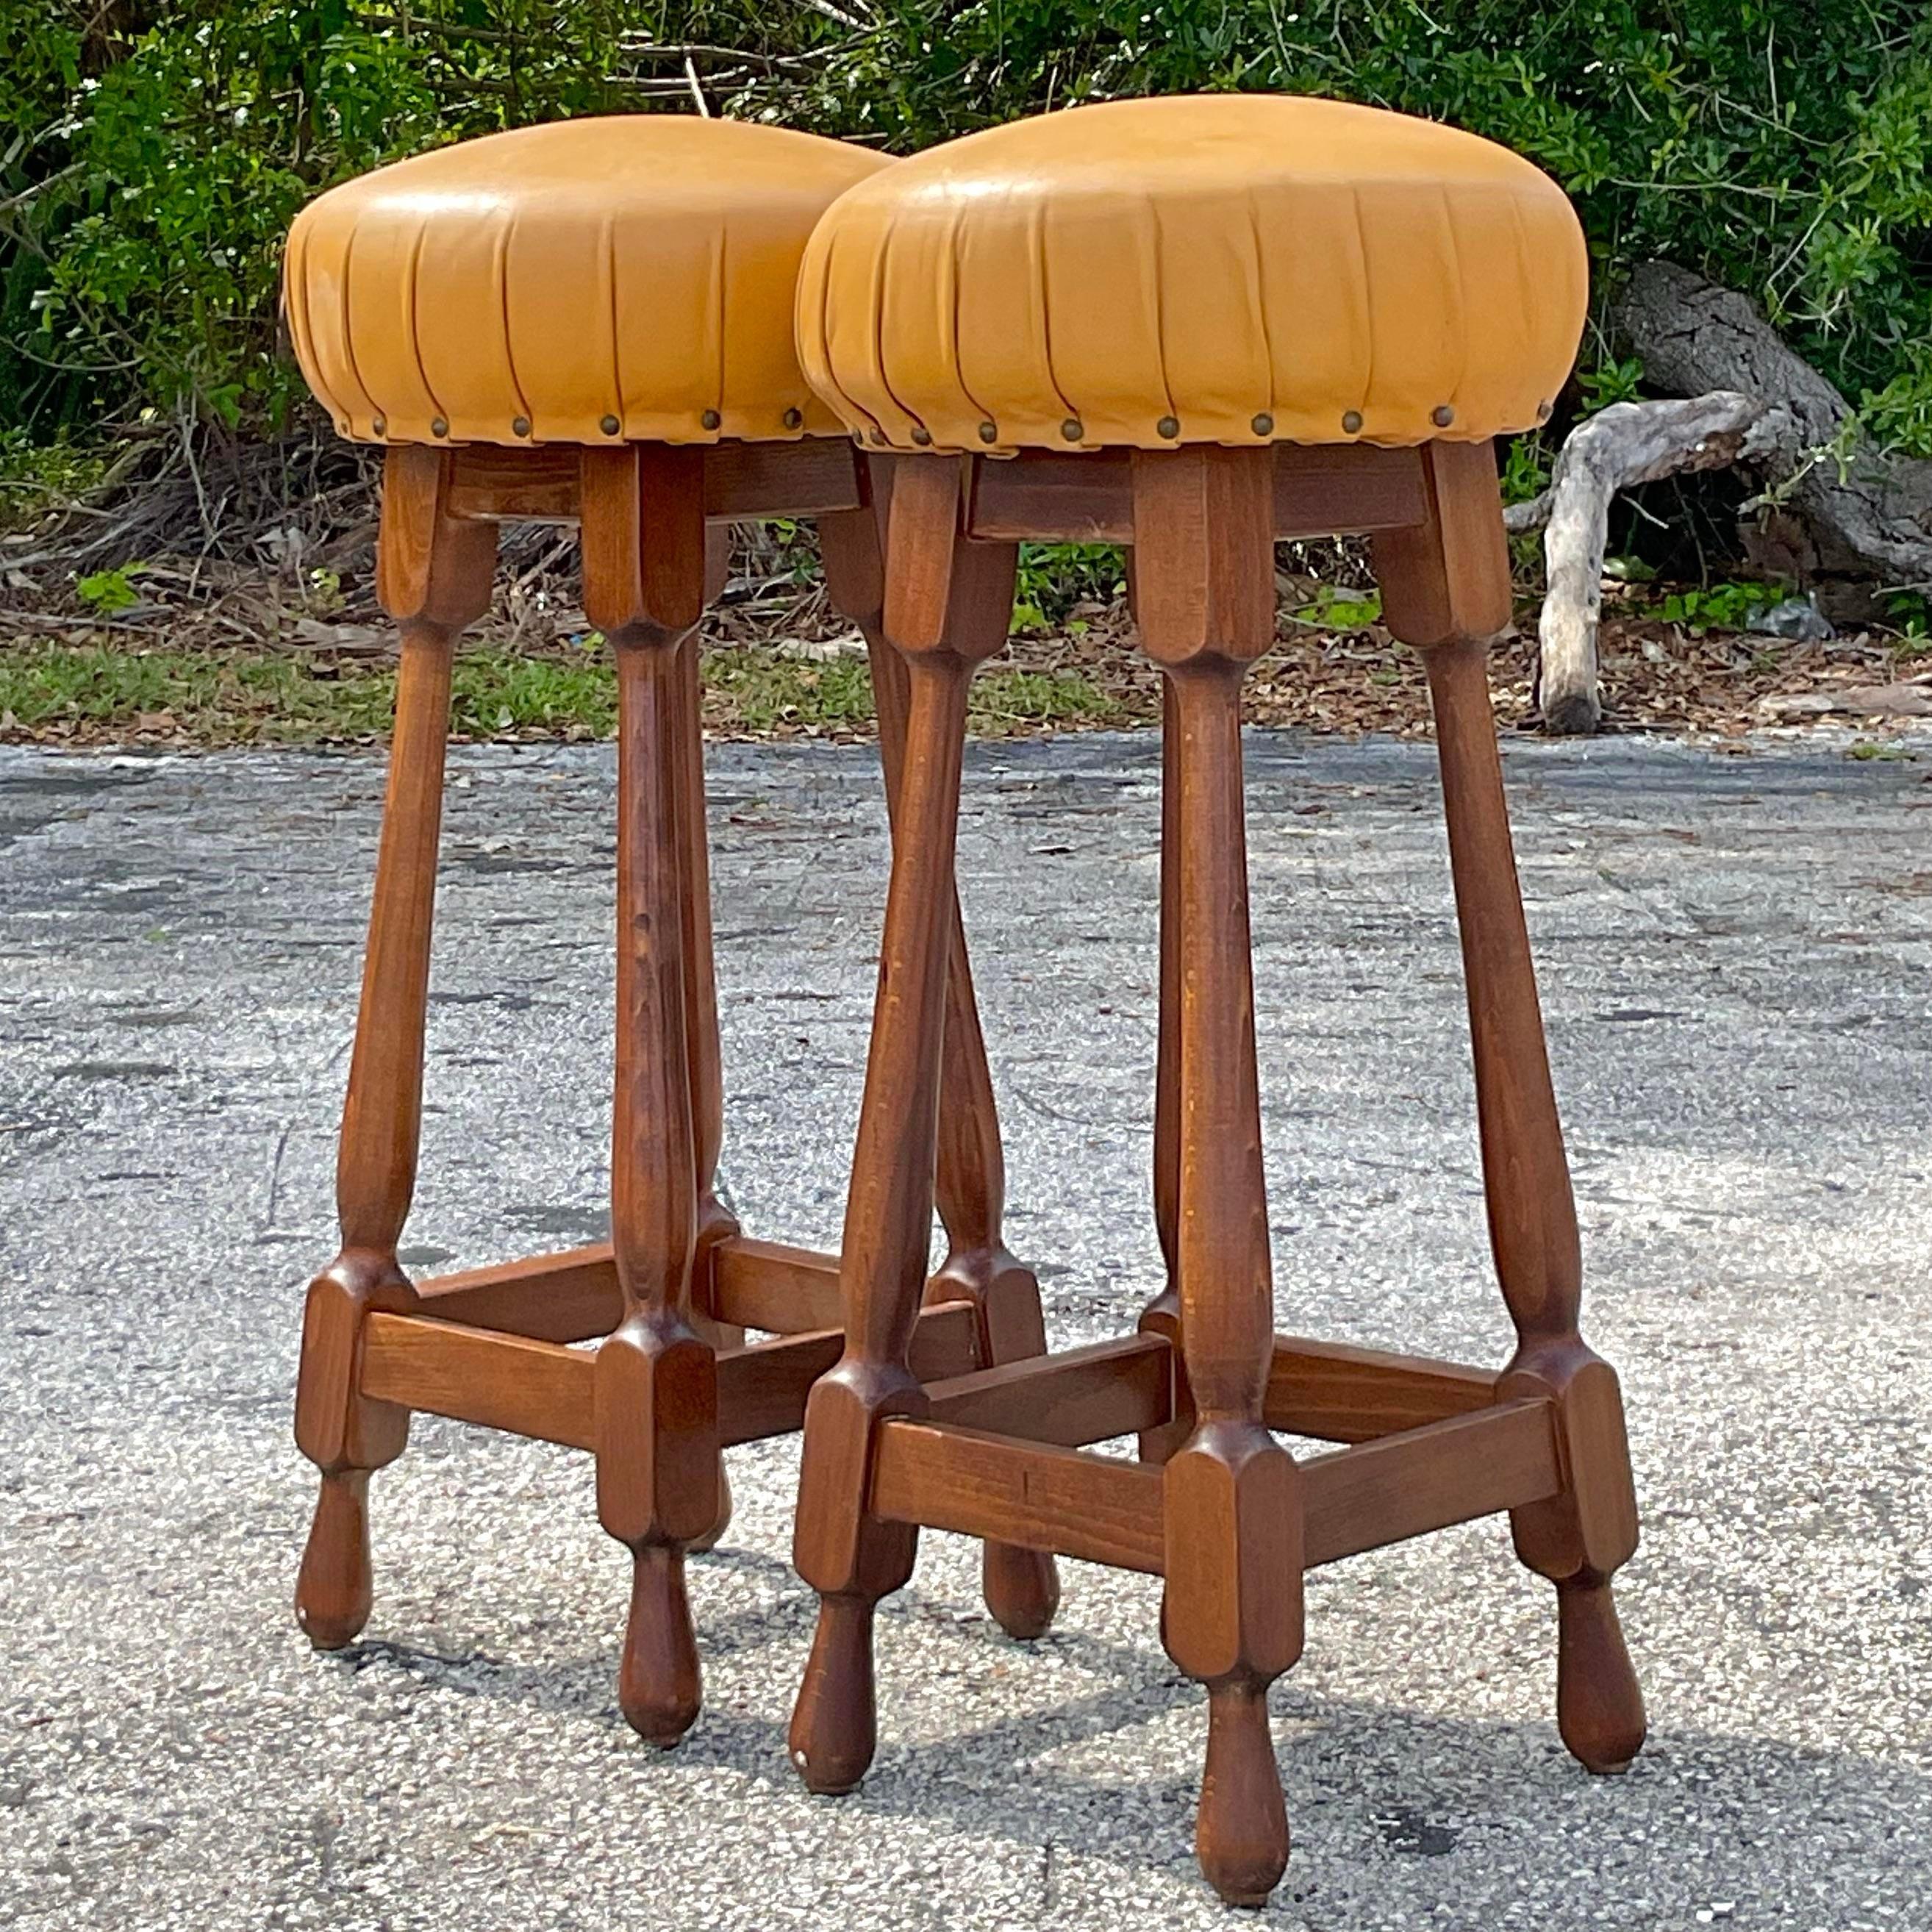 Incredible vintage old world barstools with leather seats that showcase a pleated pattern at their base with exposed nailheads. The spindle style base is intricately carved and sculptural. Great masculine addition to any old world bar or counter